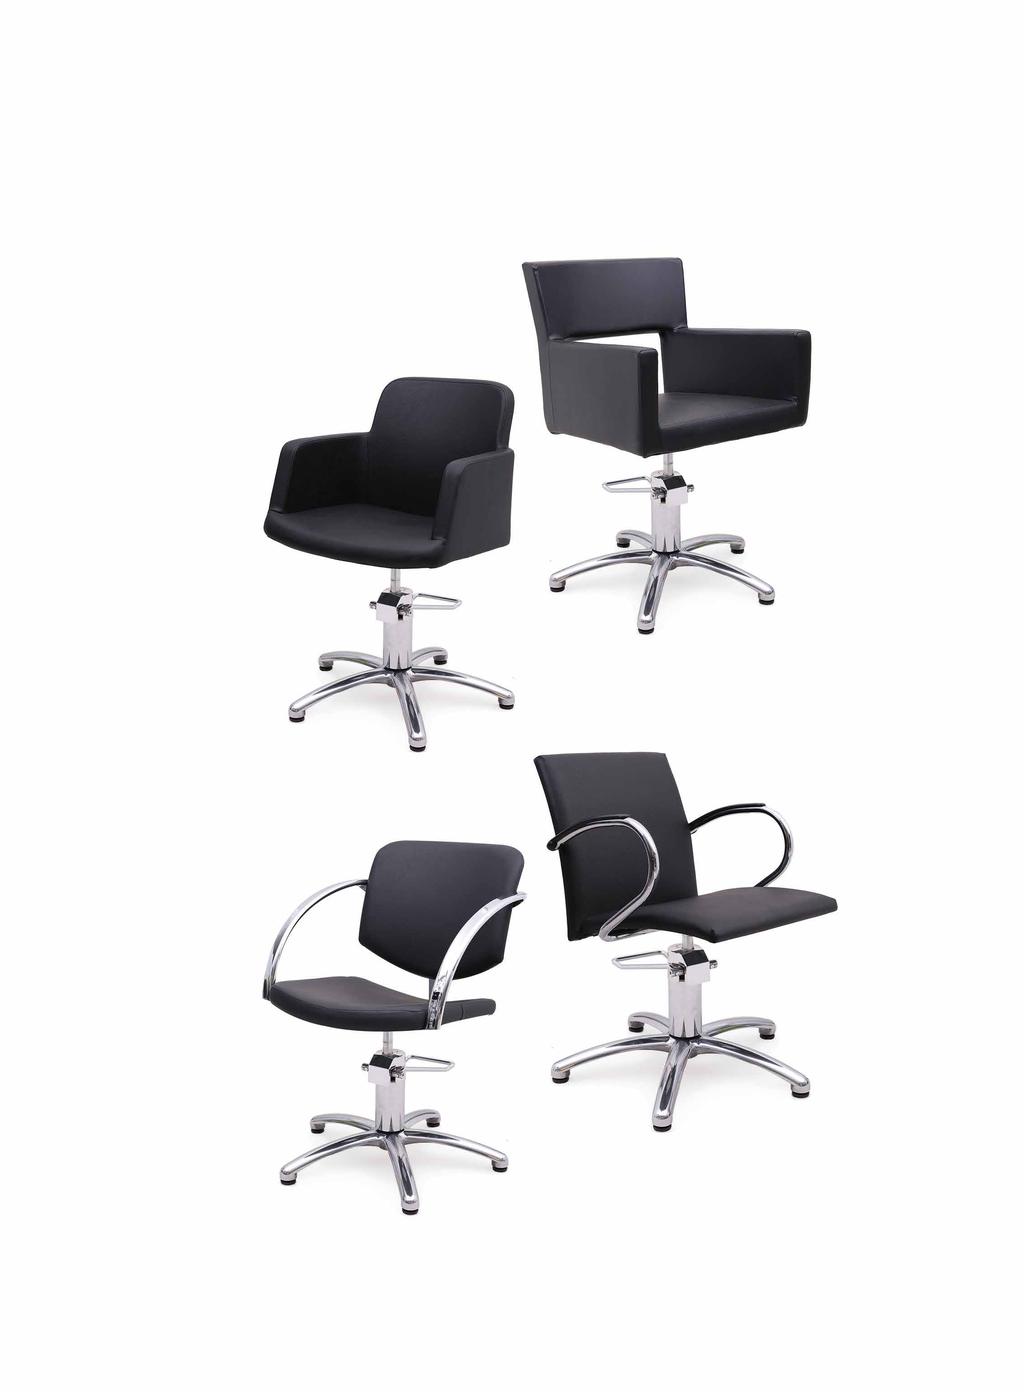 FAUTEUILS STYLING CHAIRS PIED DISQUE